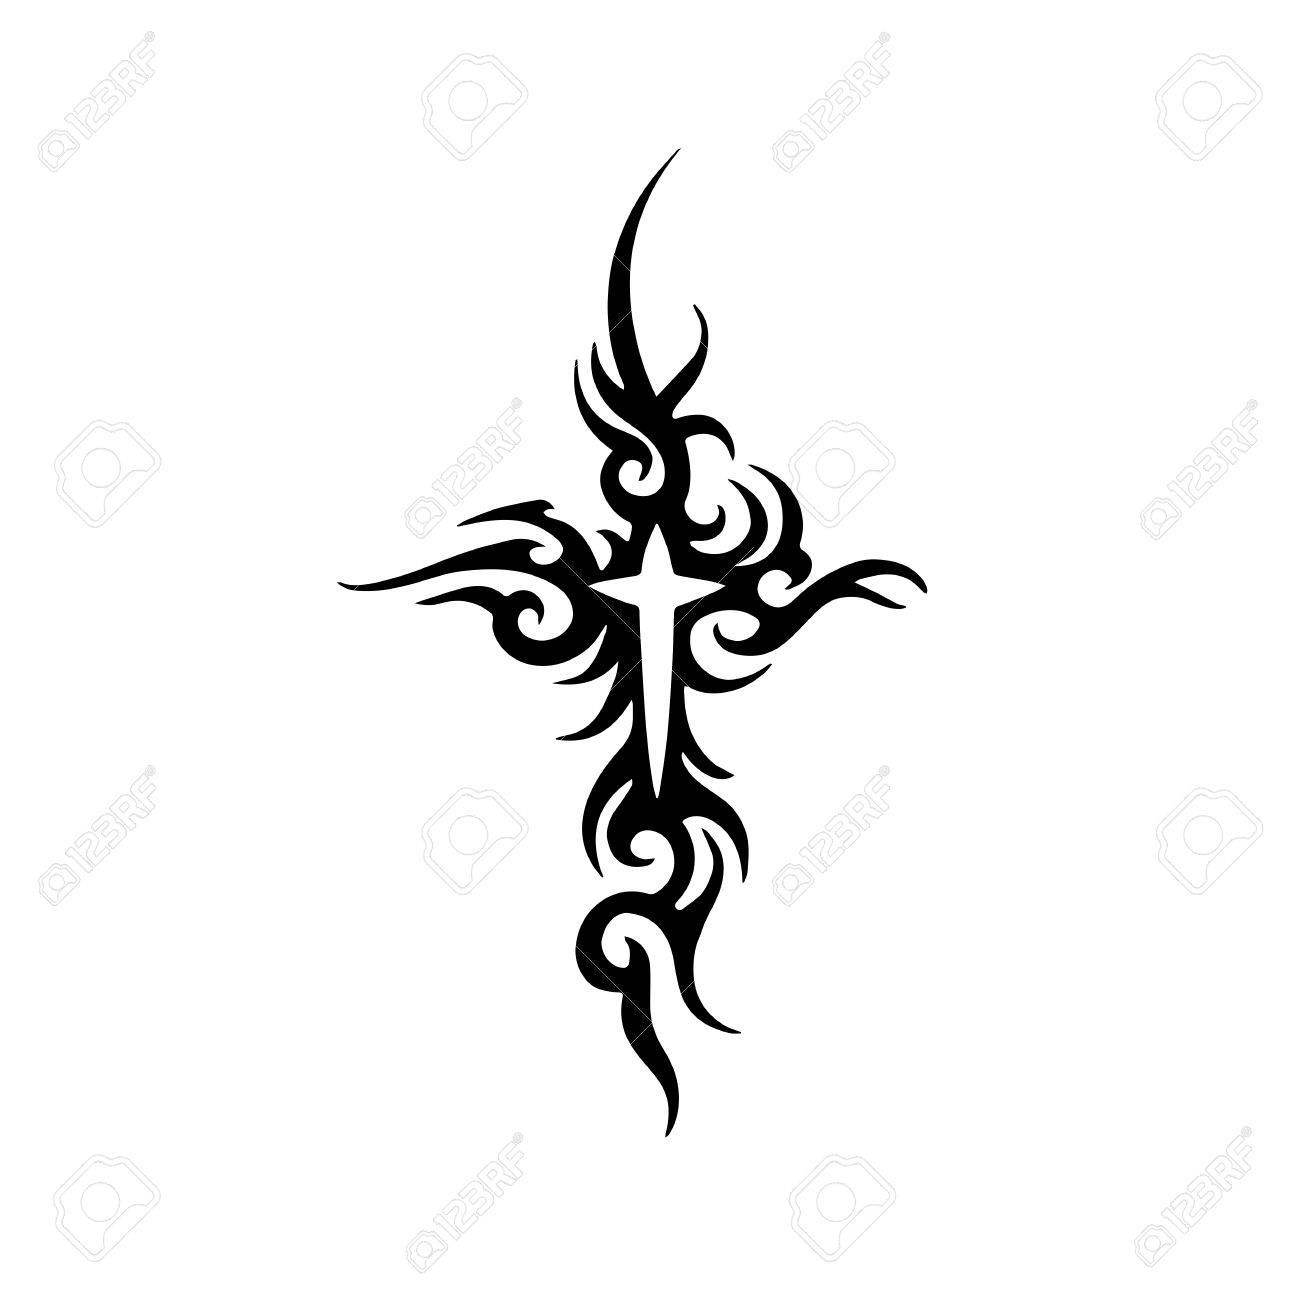 Tribal Cross Tattoo Design Royalty Free Cliparts Vectors And Stock pertaining to sizing 1300 X 1300